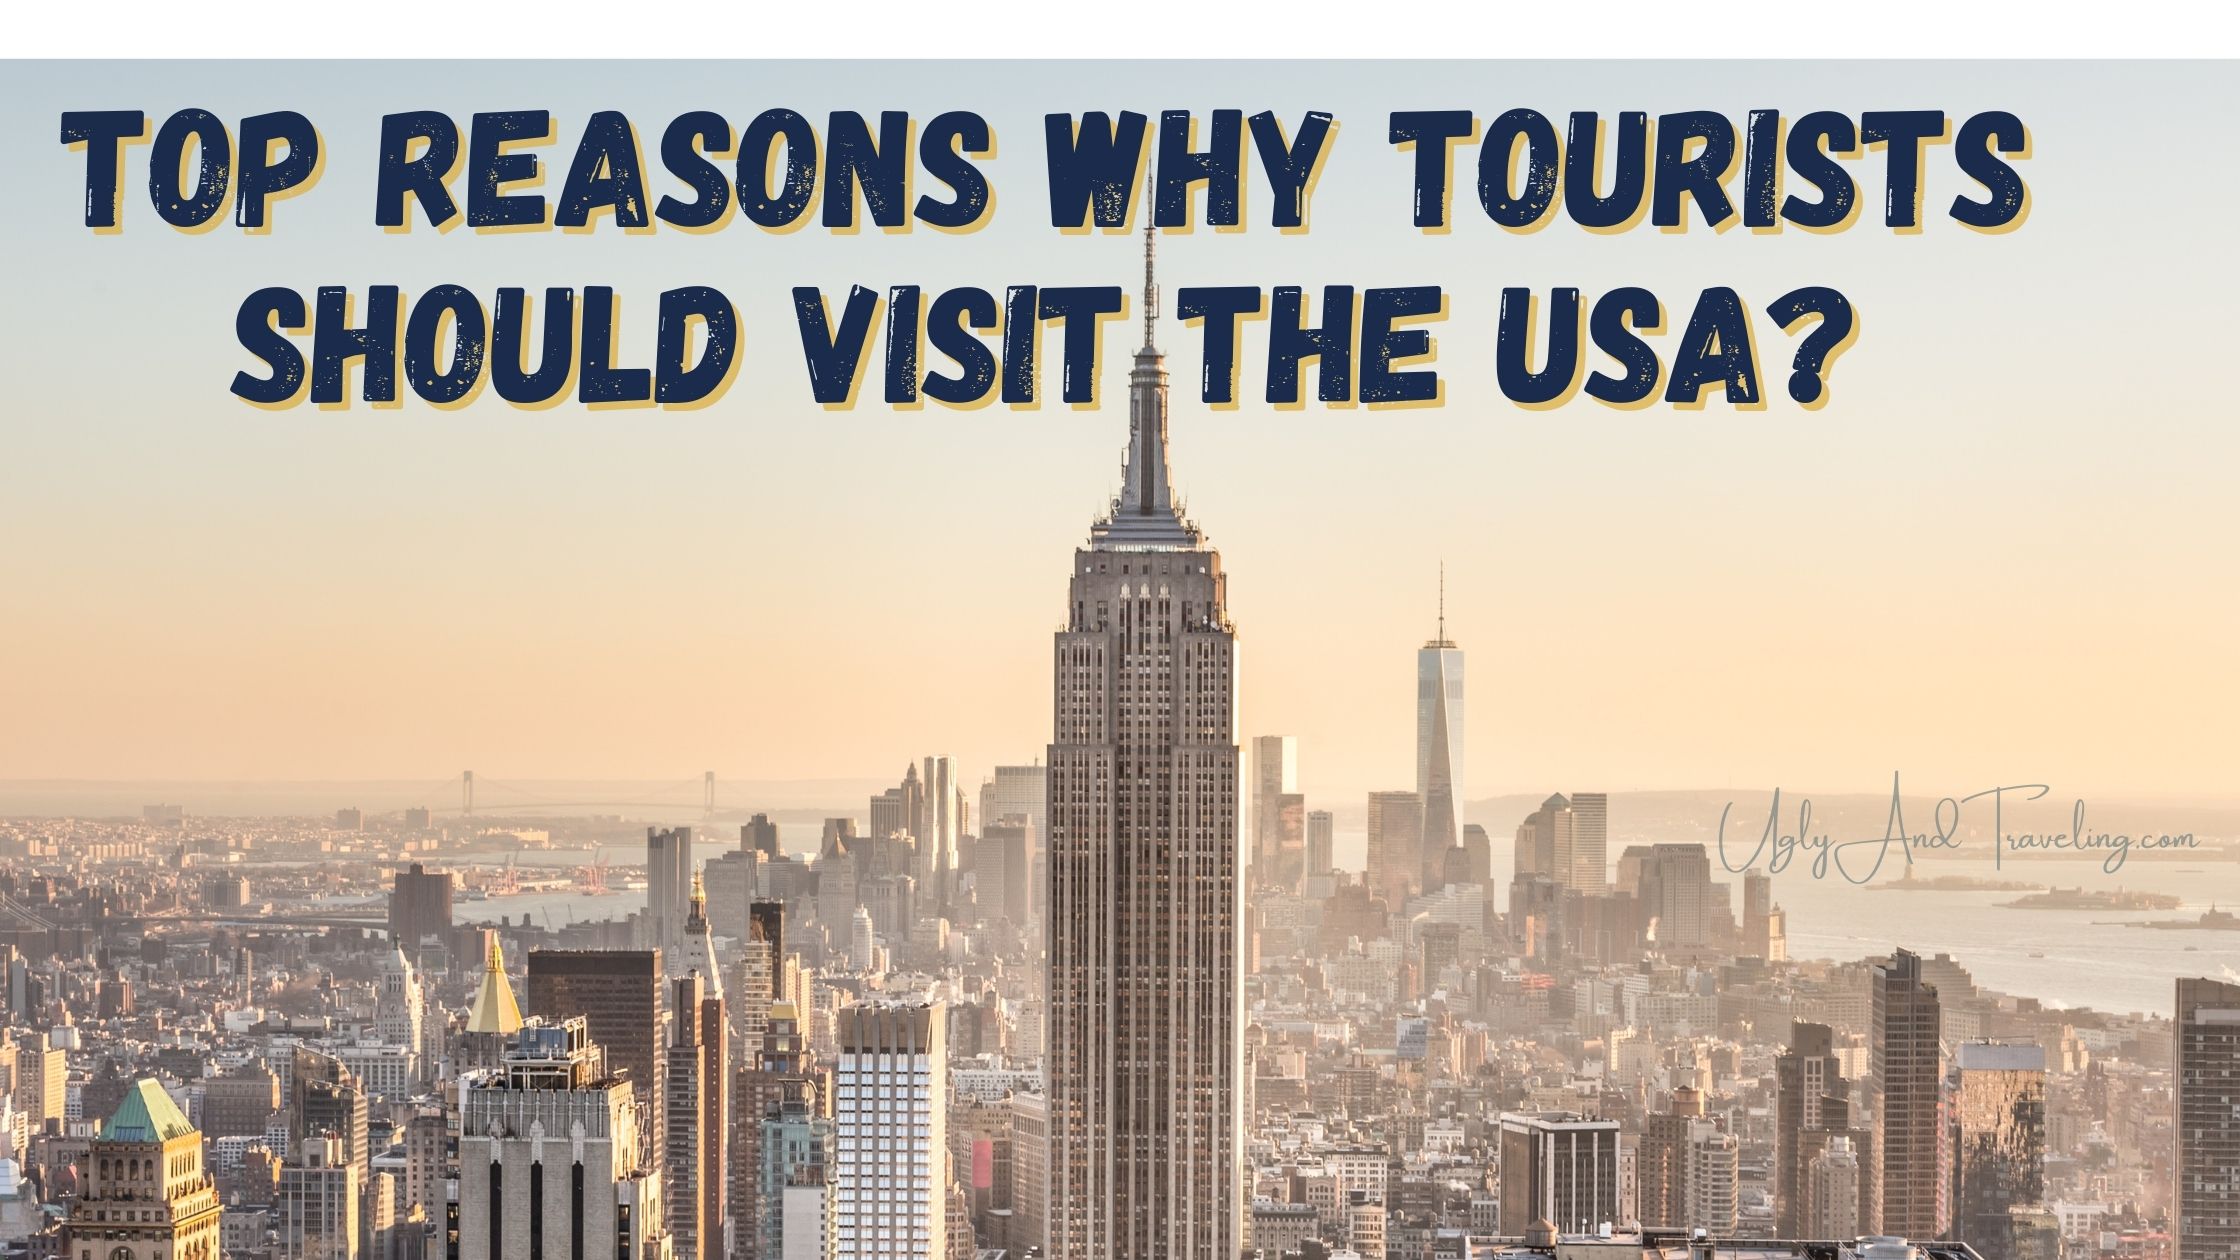 What are the Top Reasons Why Tourists Should Visit the USA